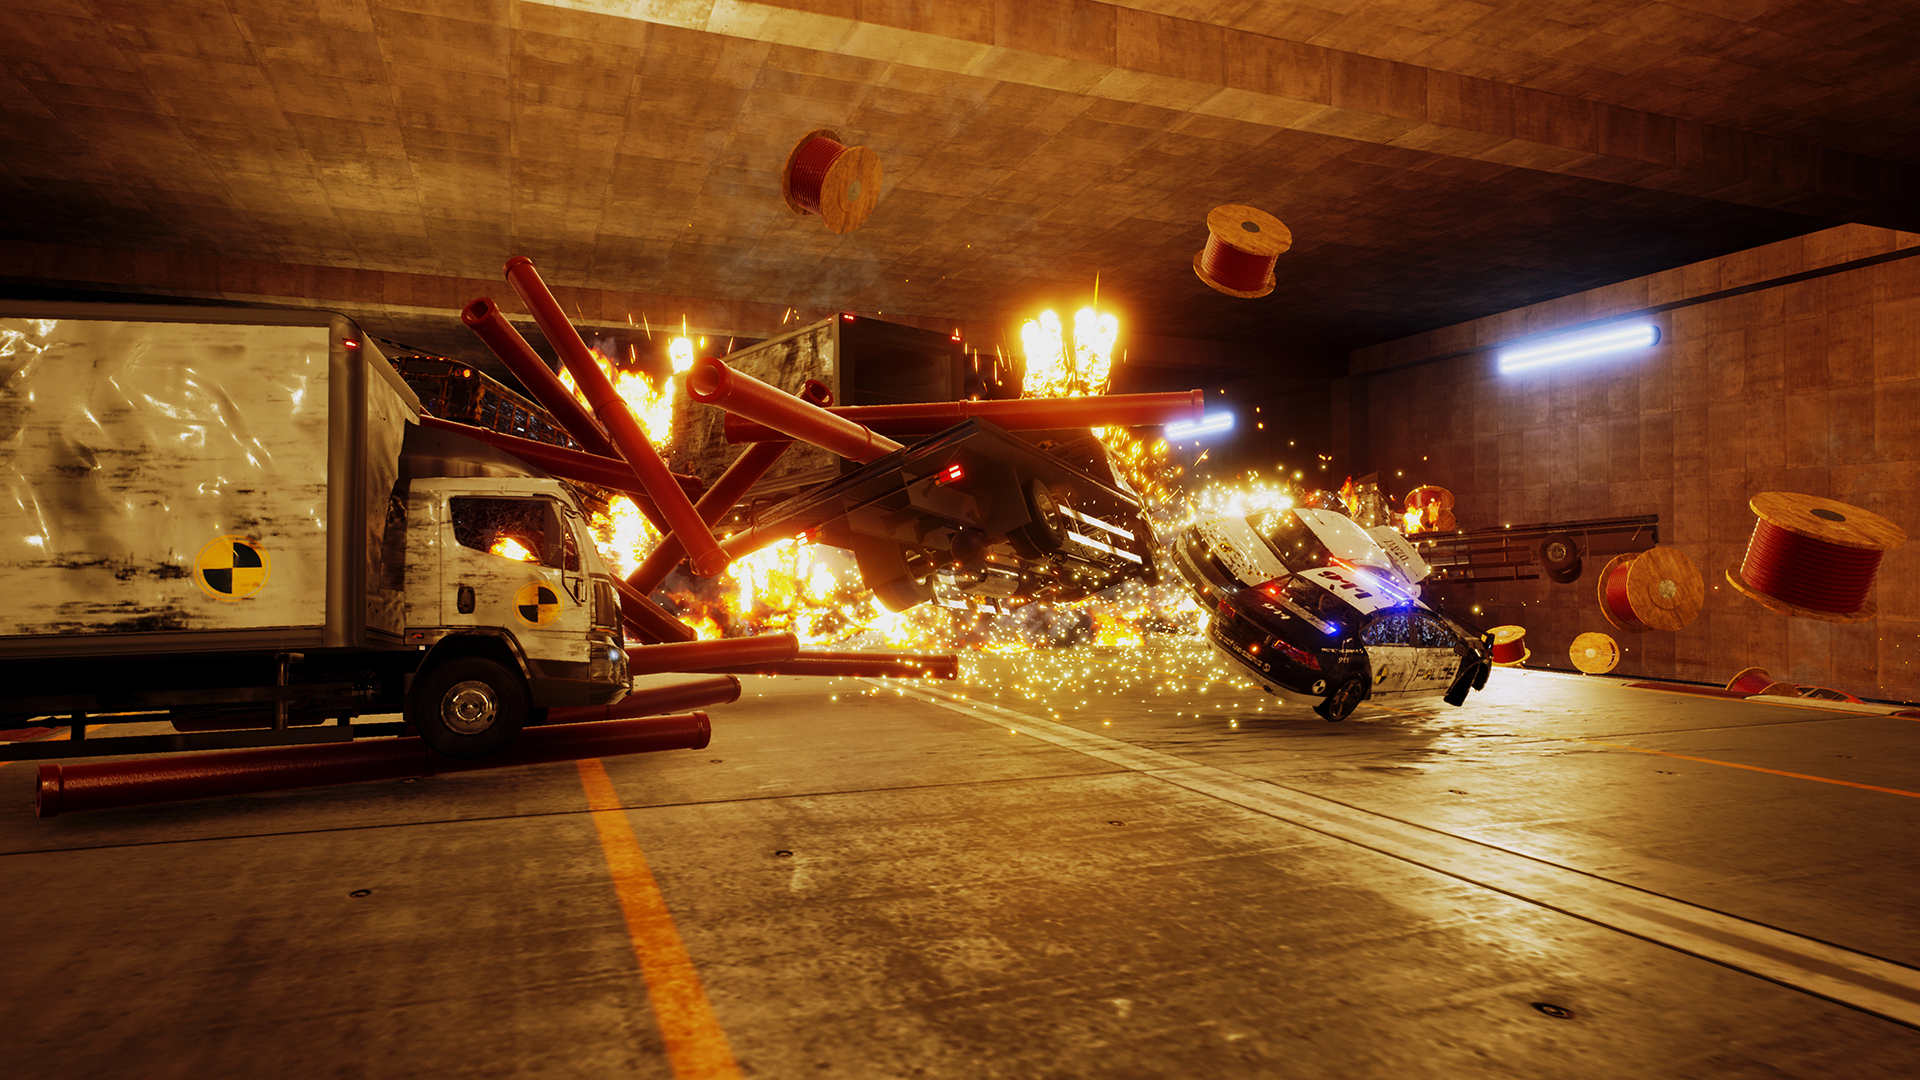 Burnout Creators Try To Turn Crash Mode Into A Game Again